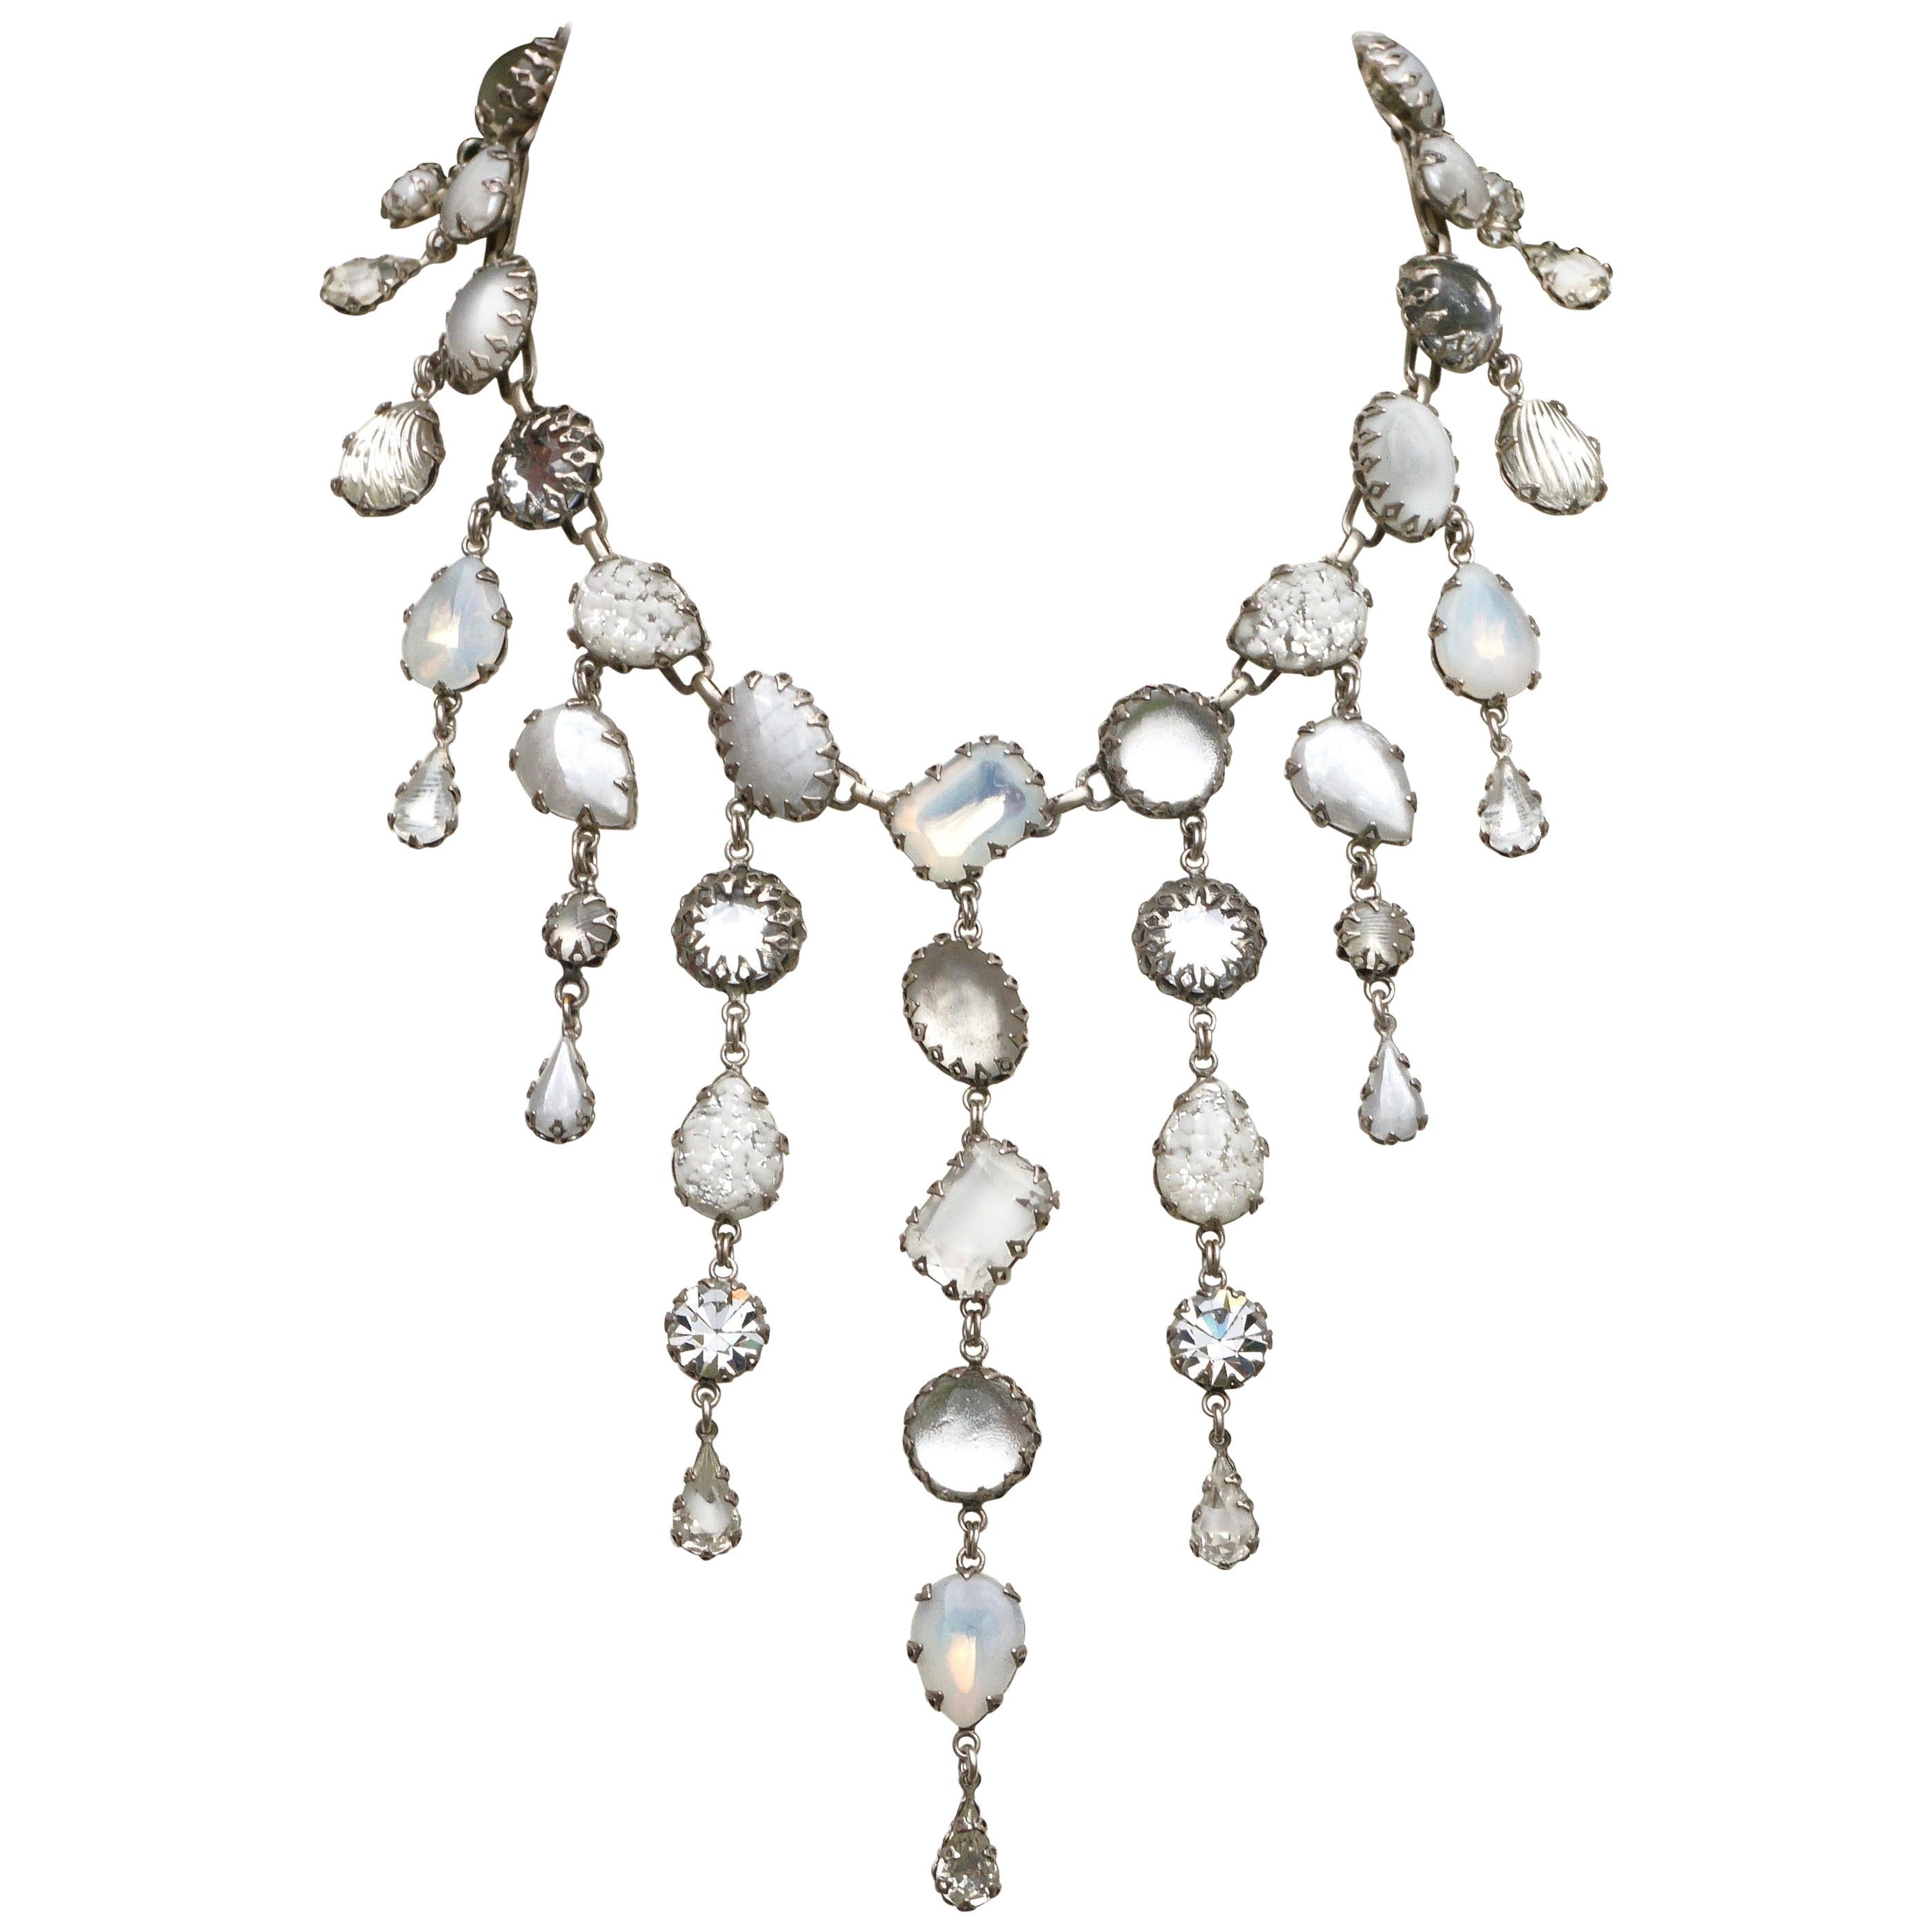 De Luxe NYC/A'dam Silver Tone White Clear and Opaline Art Glass Drop Necklace For Sale